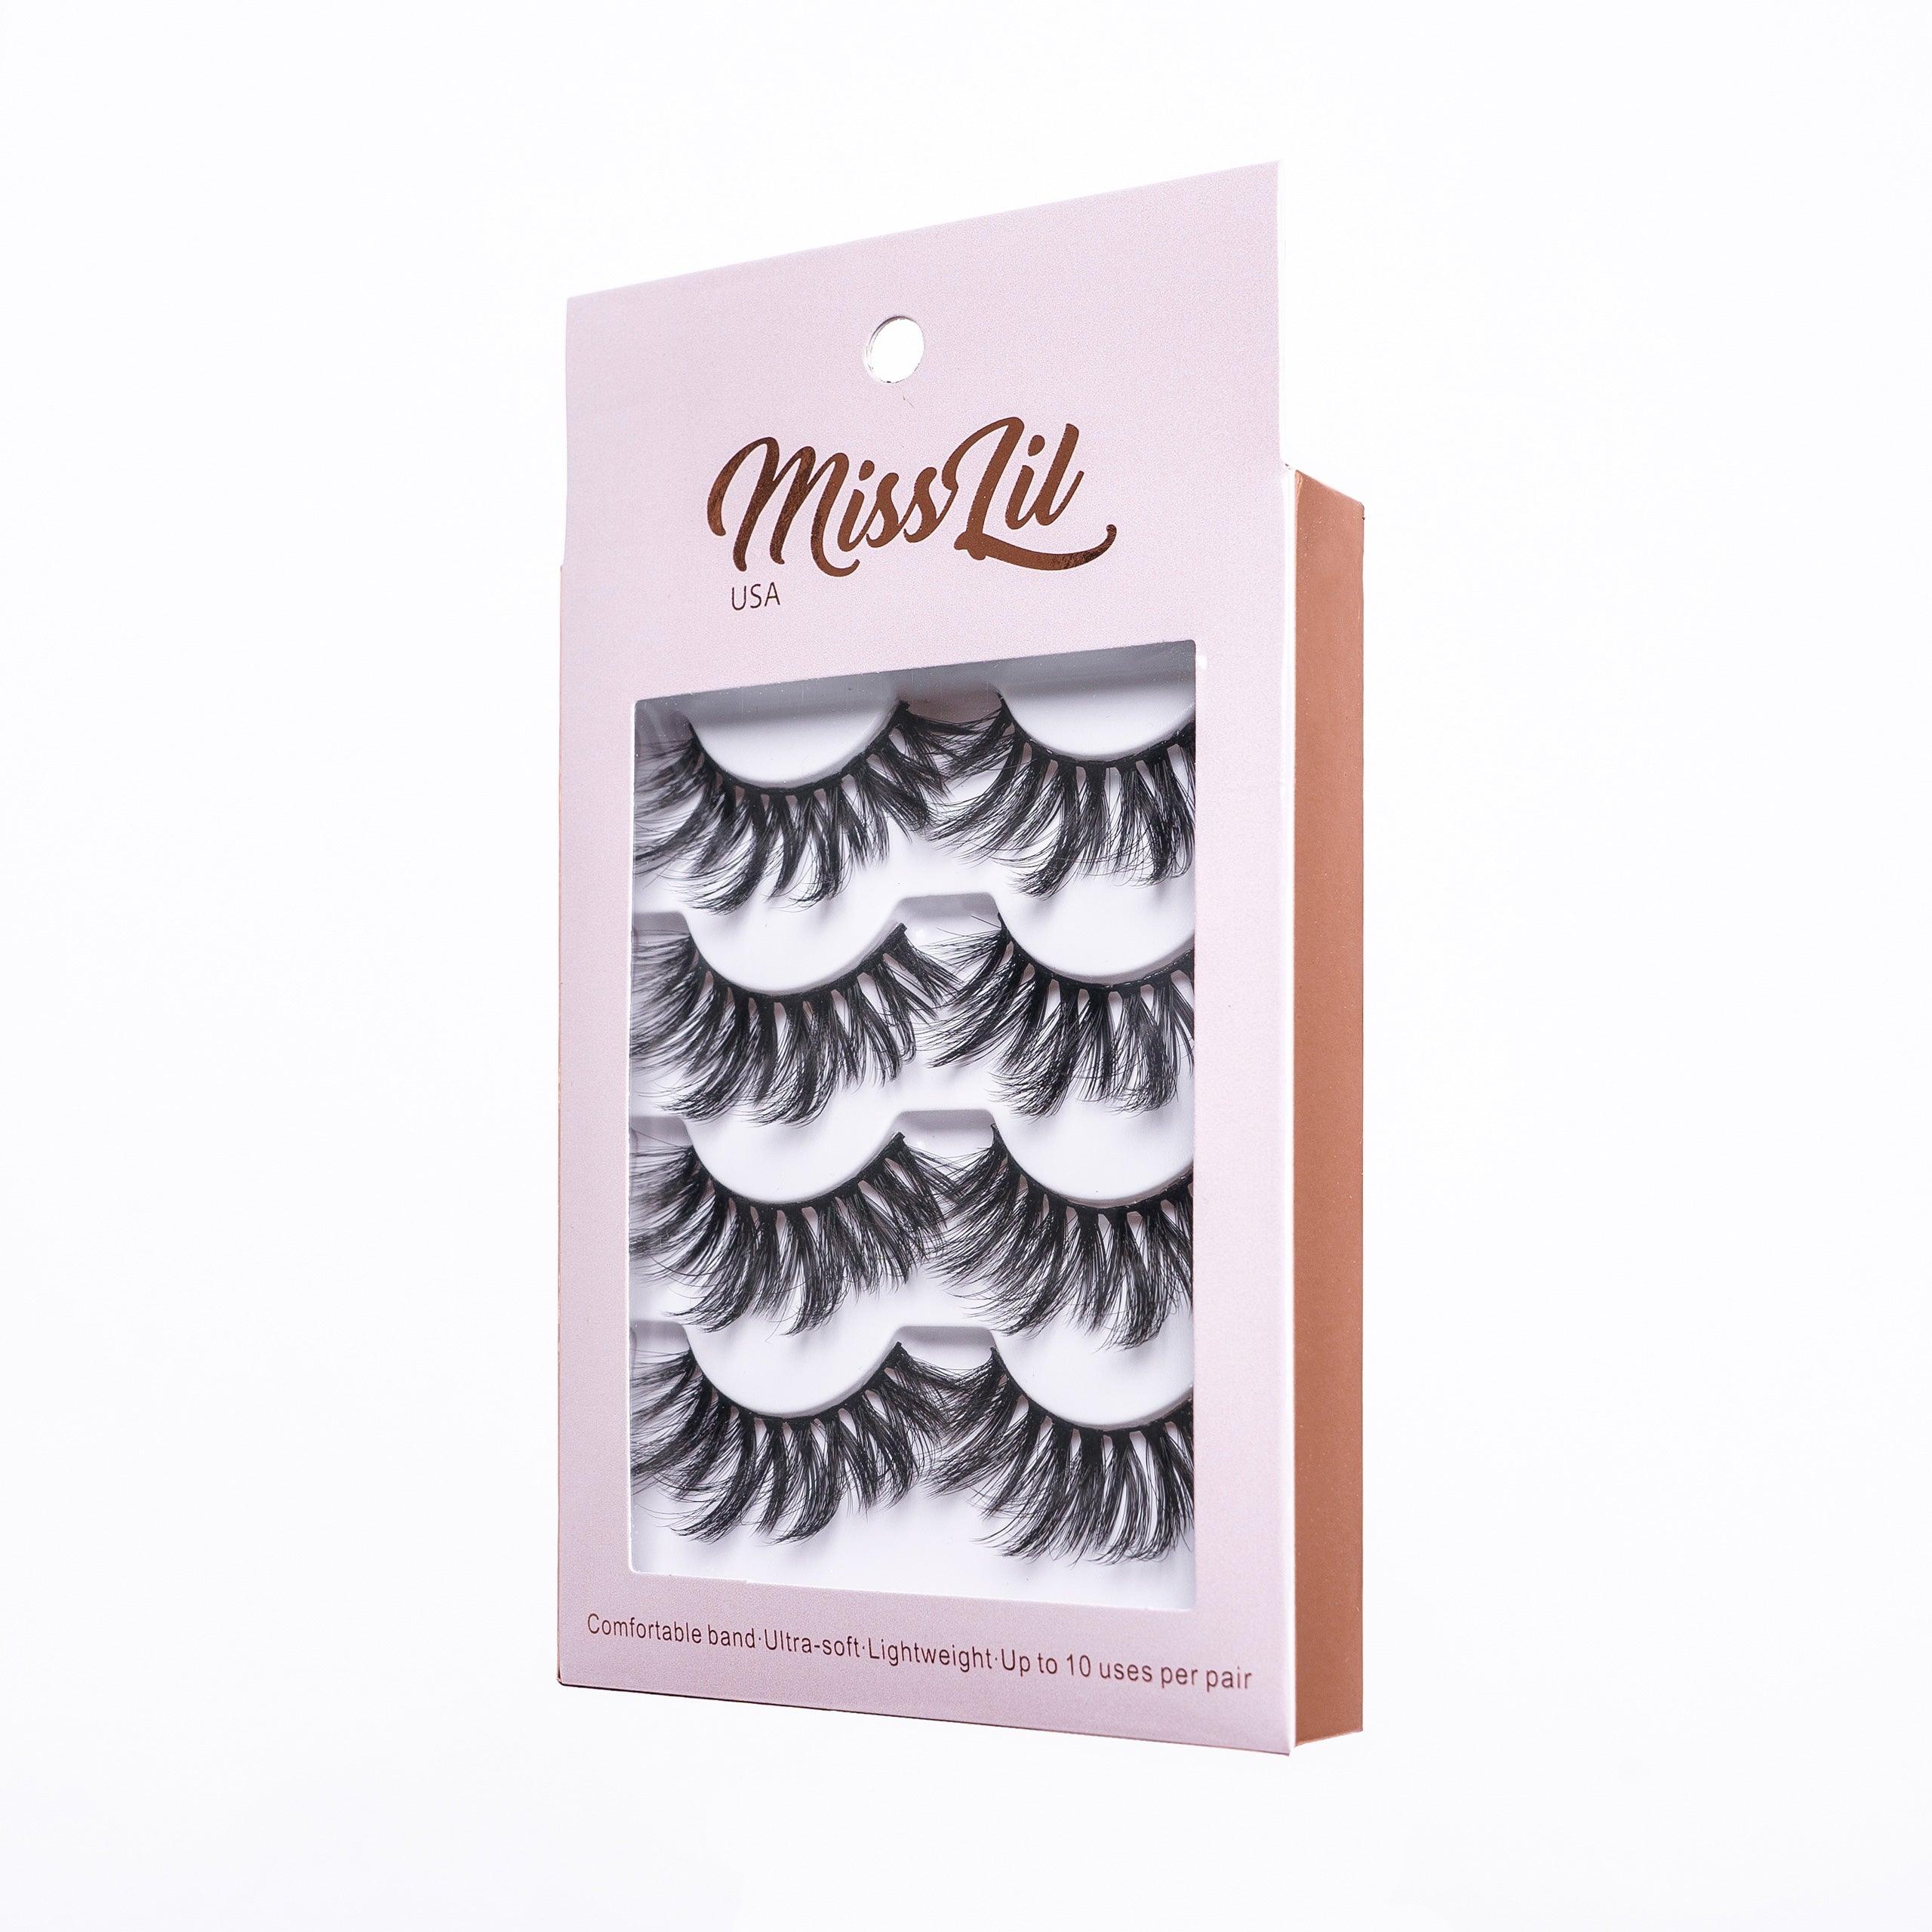 4 Pairs Lashes Classic Collection #11 (Pack of 12) - Miss Lil USA Wholesale